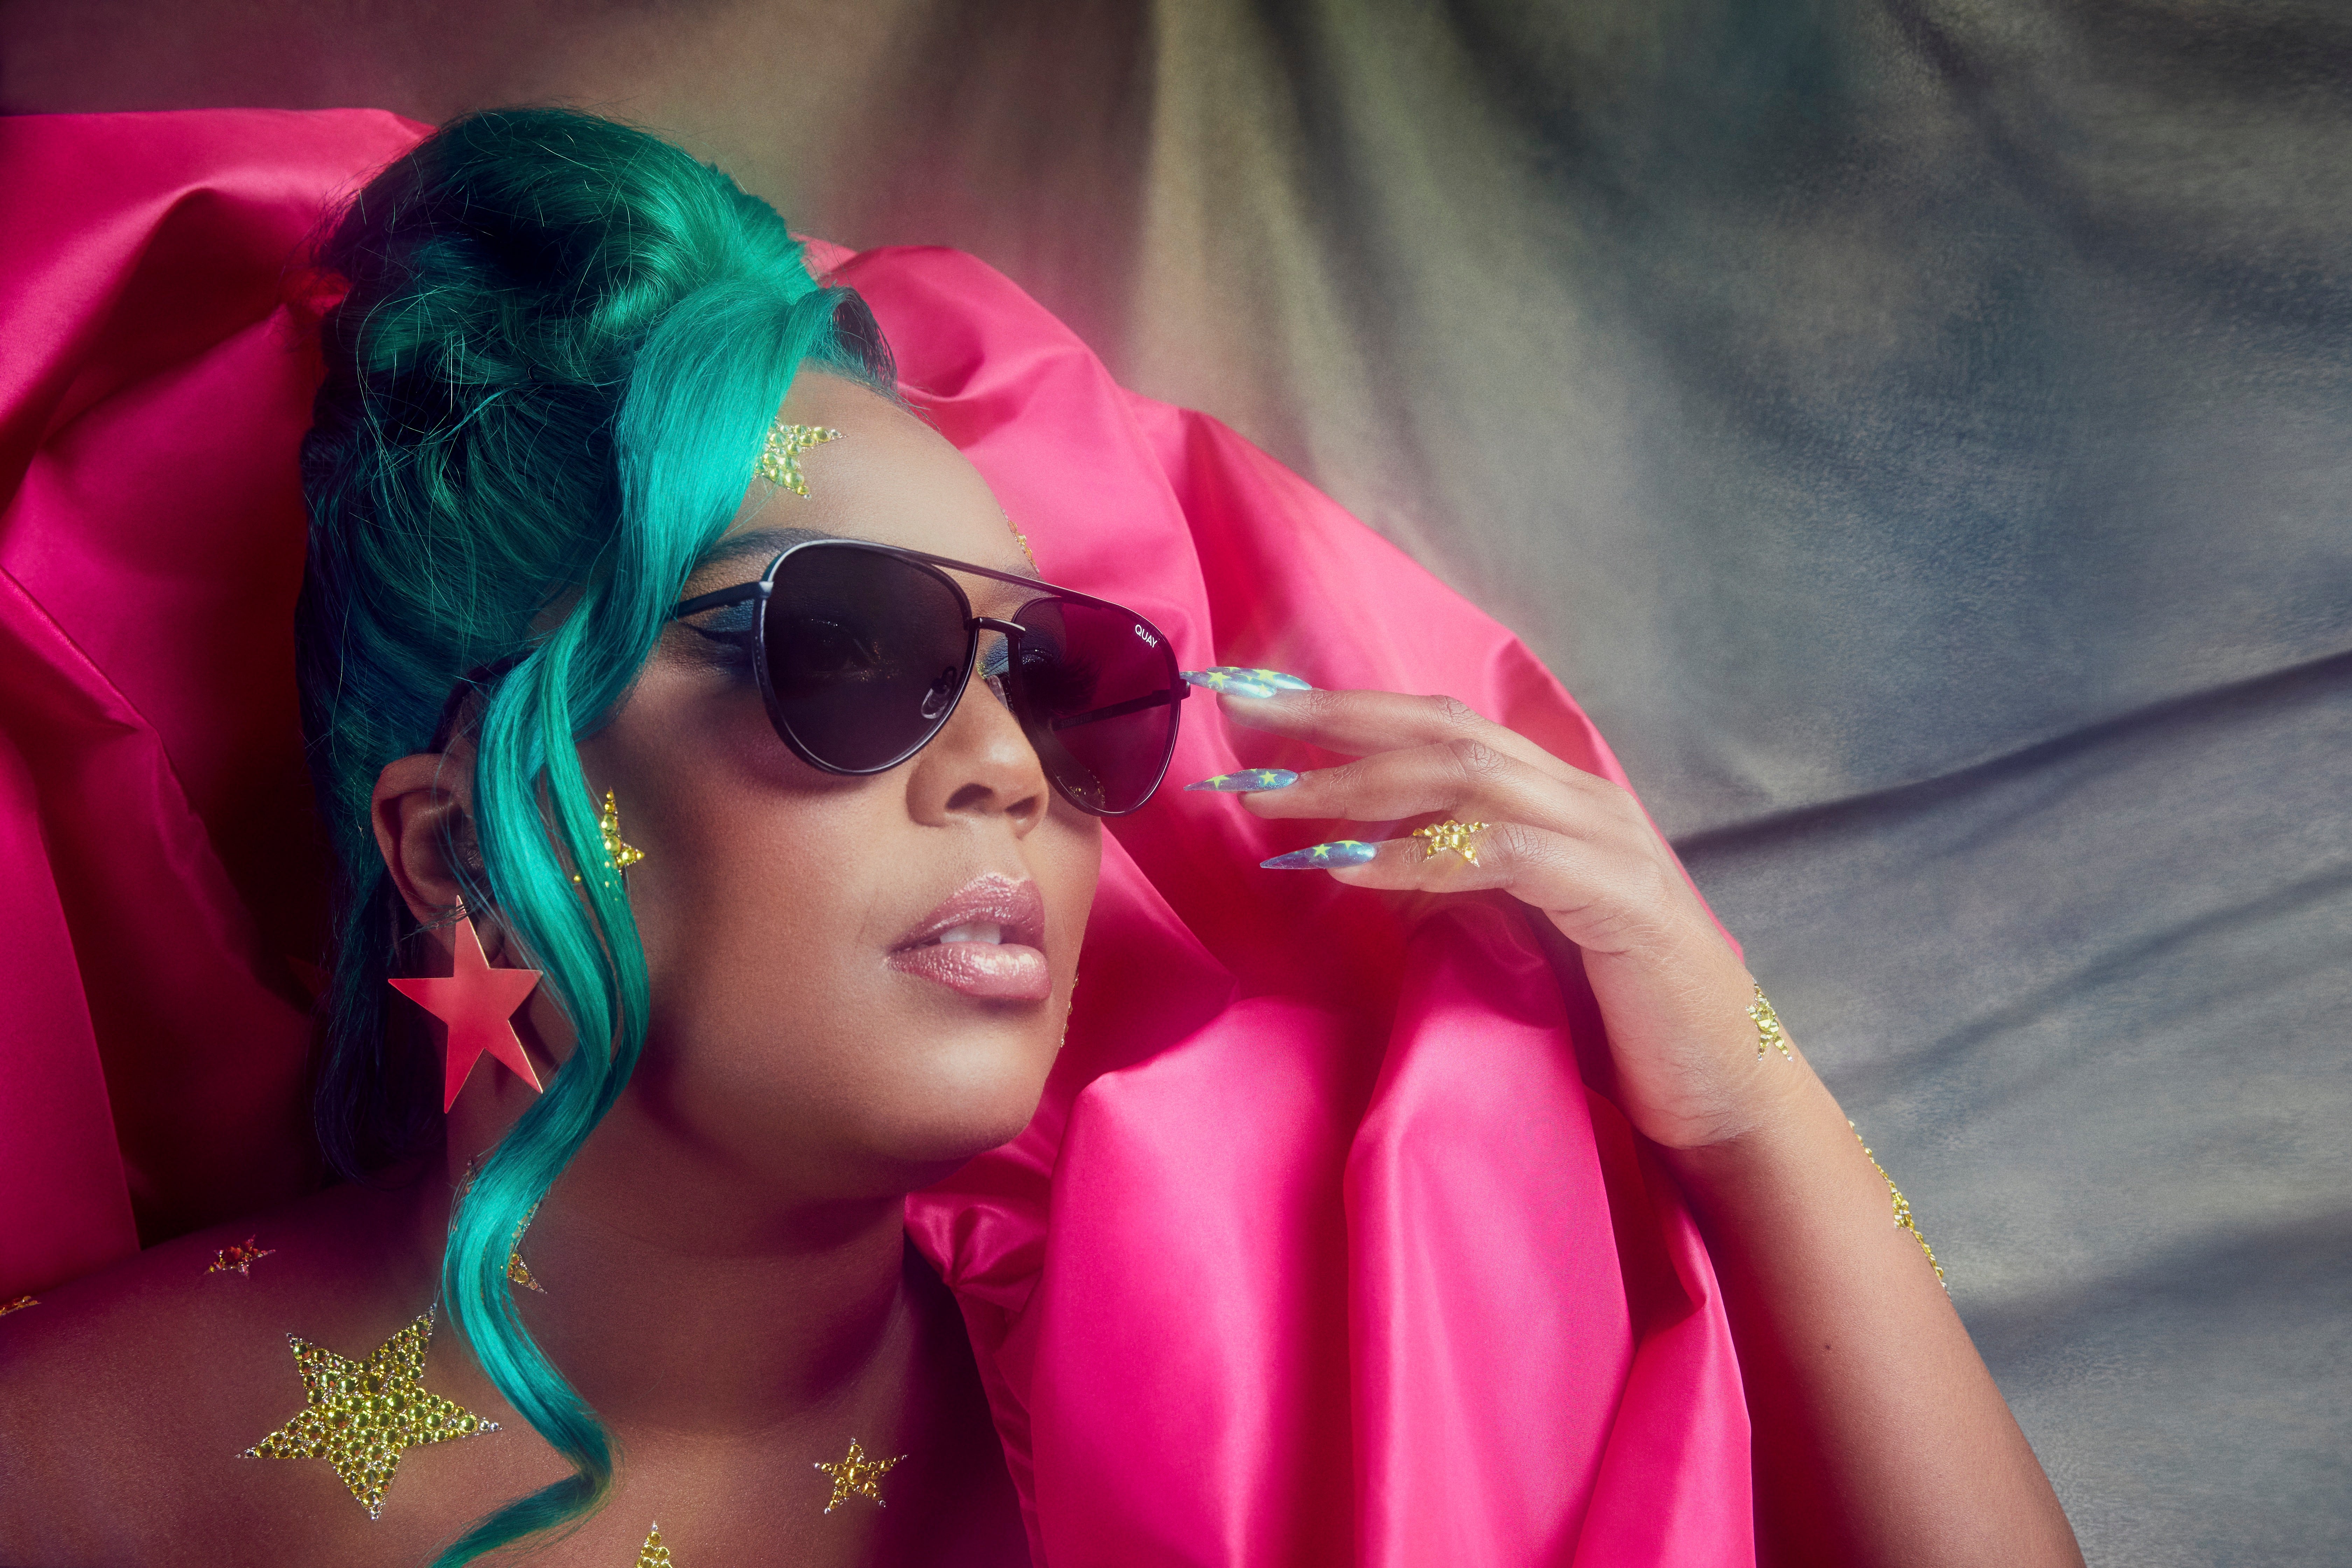 Lizzo Collaborates With Global Eyewear Brand Quay To Raise Voter Awareness